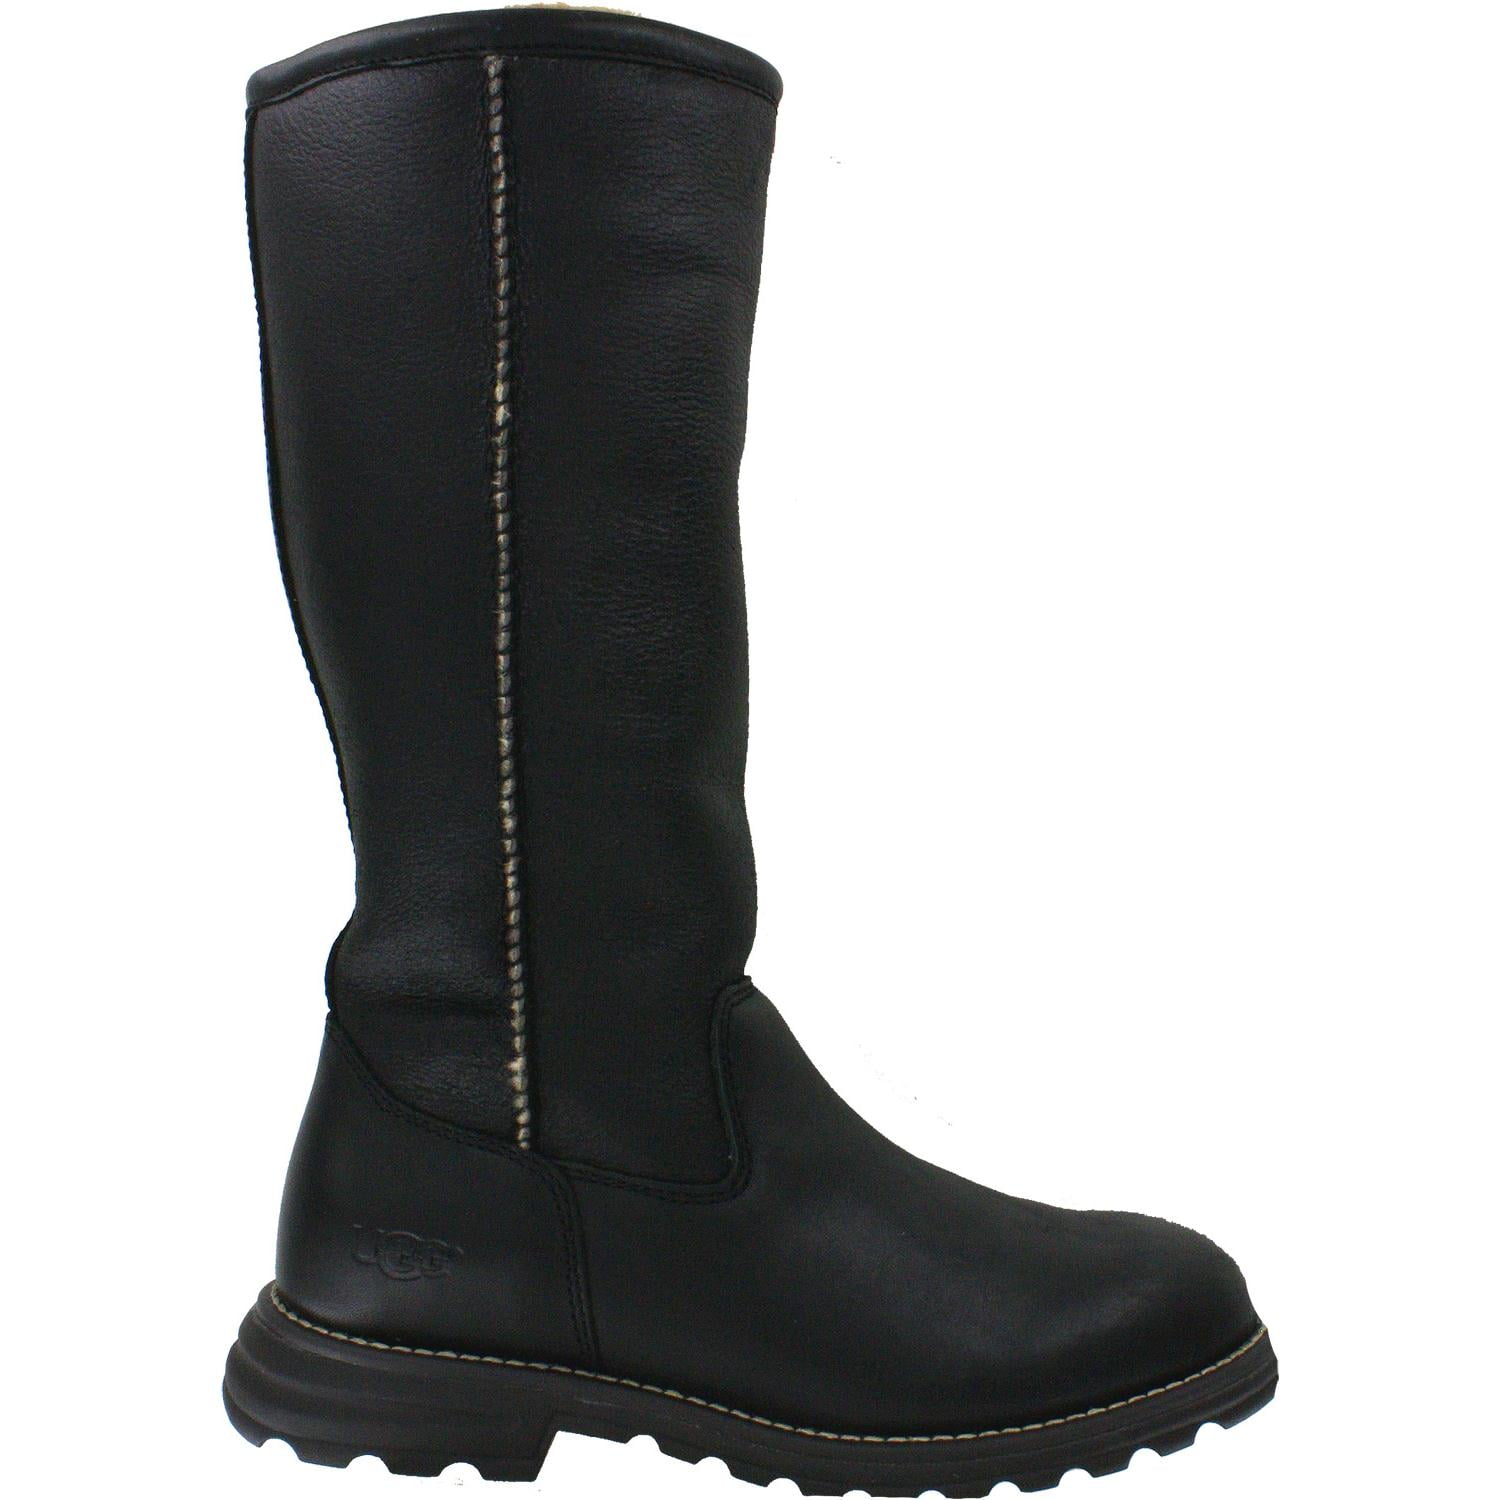 ugg brook stall tall leather boot